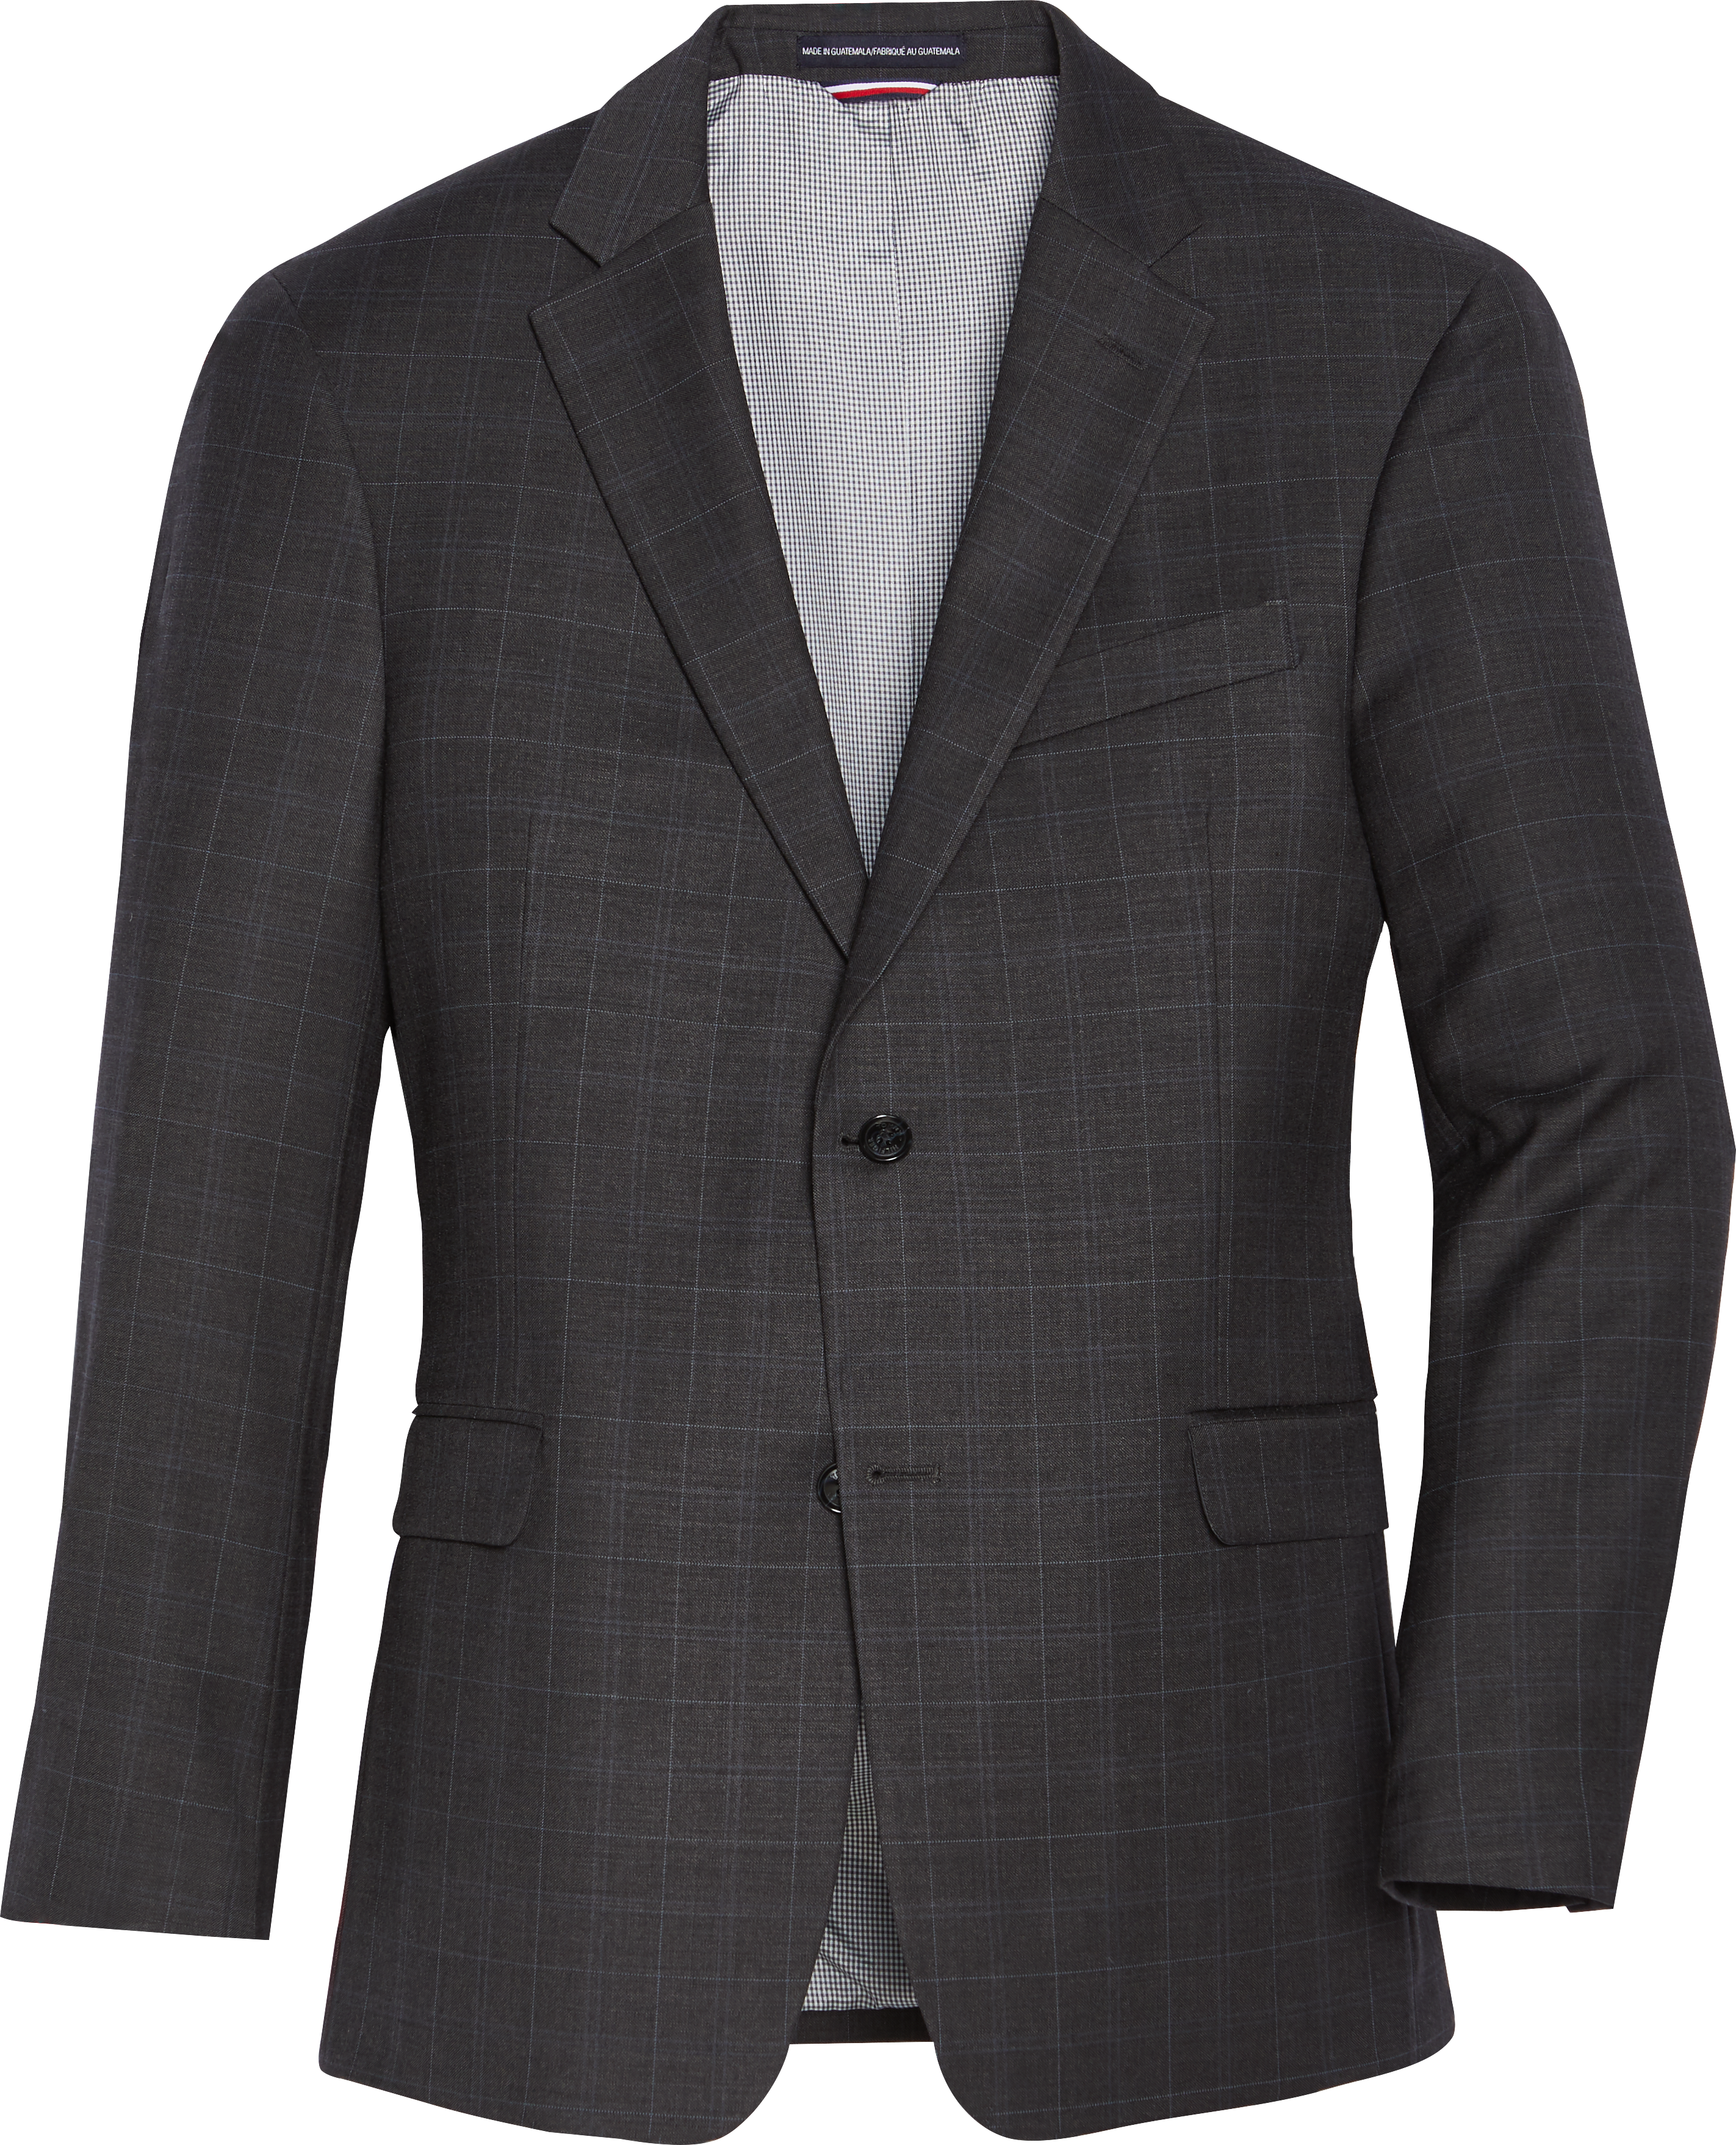 Tommy Hilfiger Modern Fit Suit Separates Coat, Charcoal Windowpane